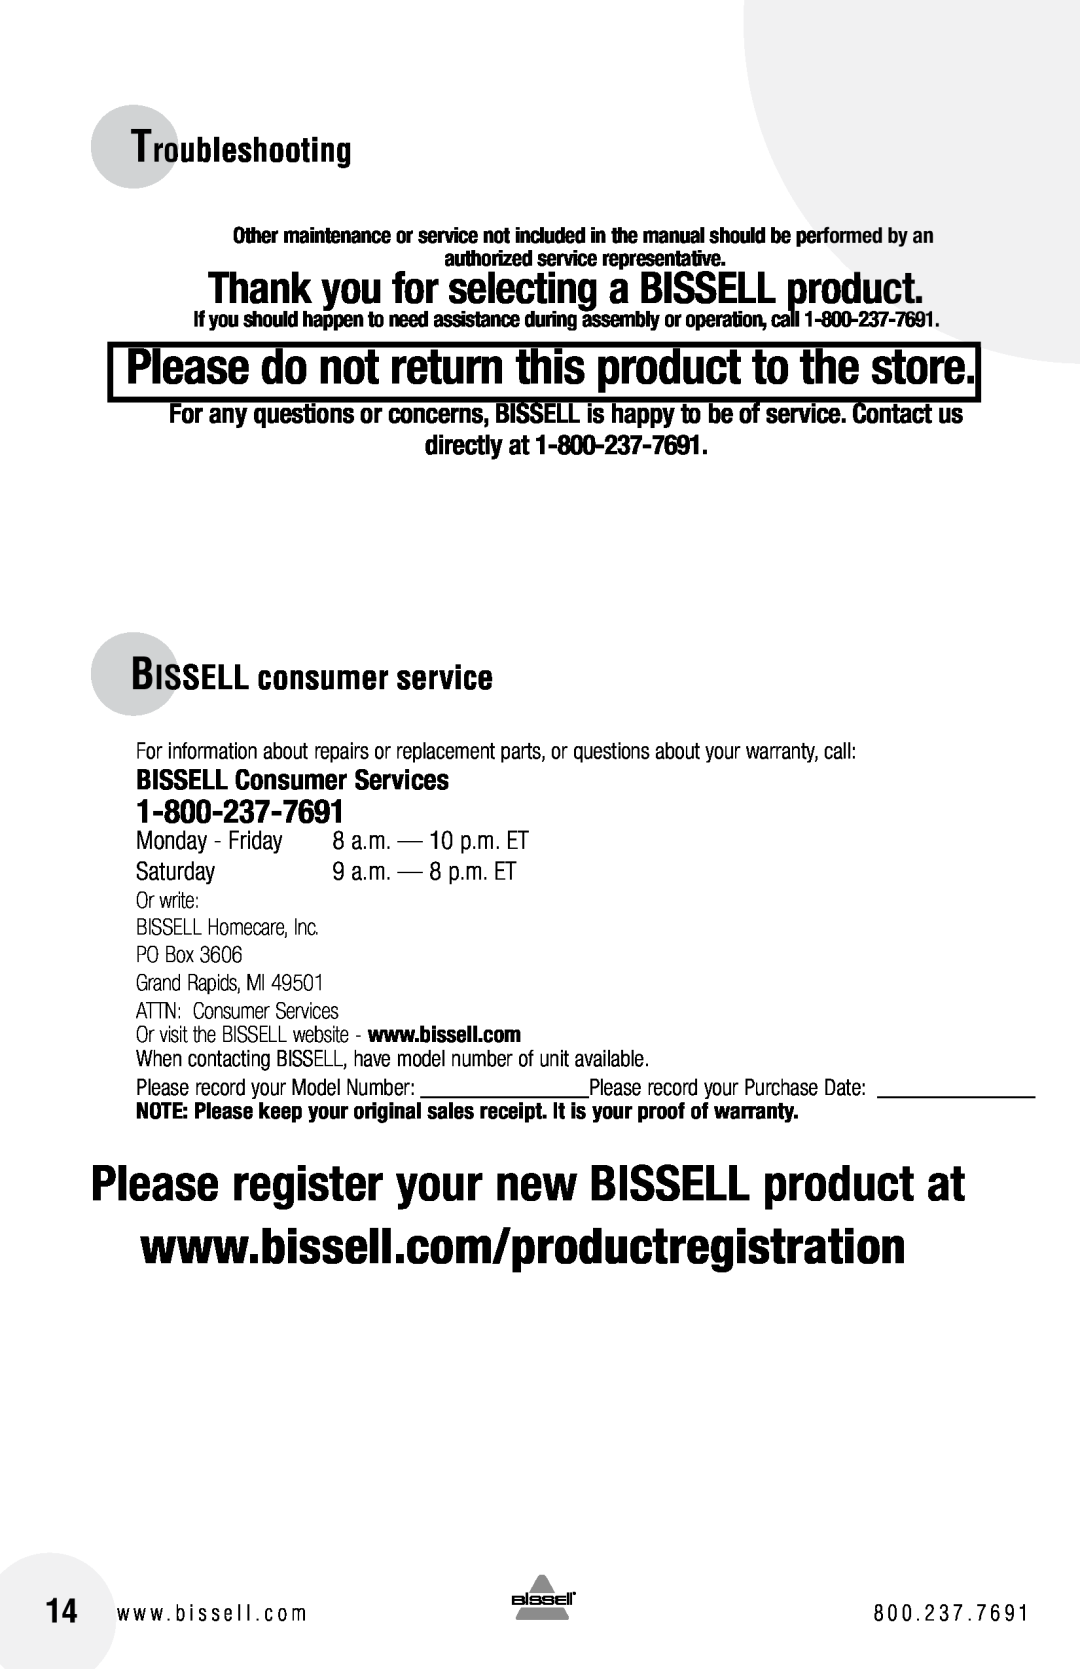 Bissell 17G5 Thank you for selecting a BISSELL product, BISSELL consumer service, BISSELL Consumer Services, directly at 